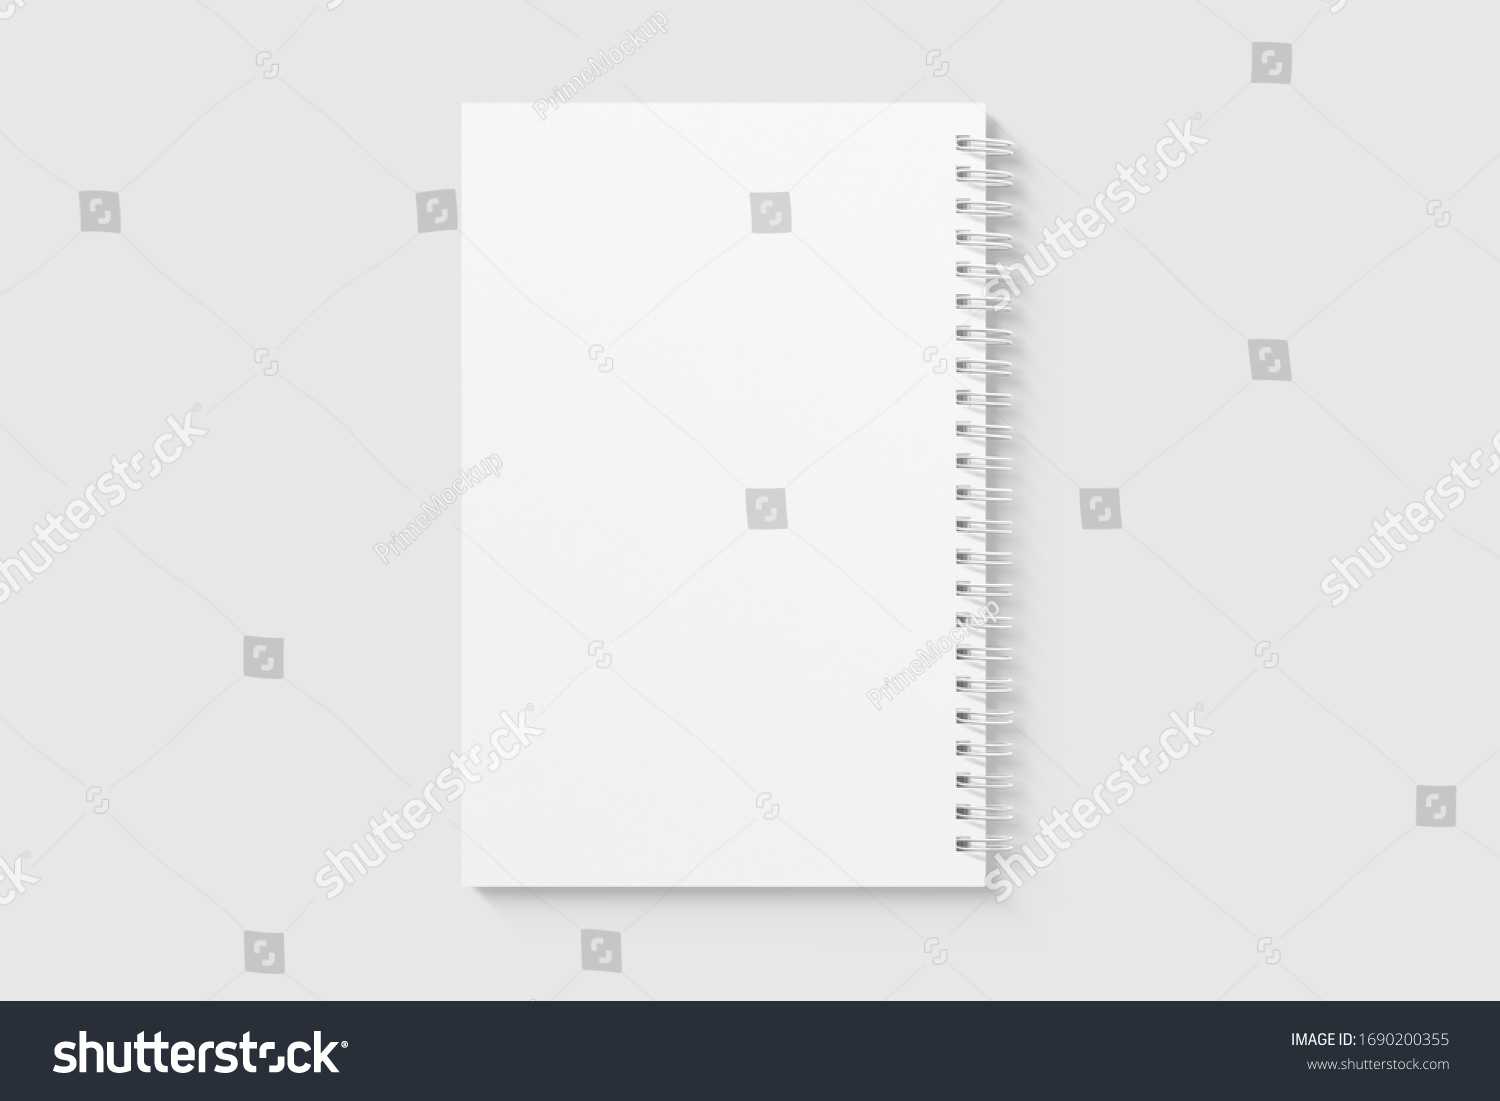 Real photo, blank spiral bound notepad mockup template, isolated on light grey background. High resolution. #1690200355